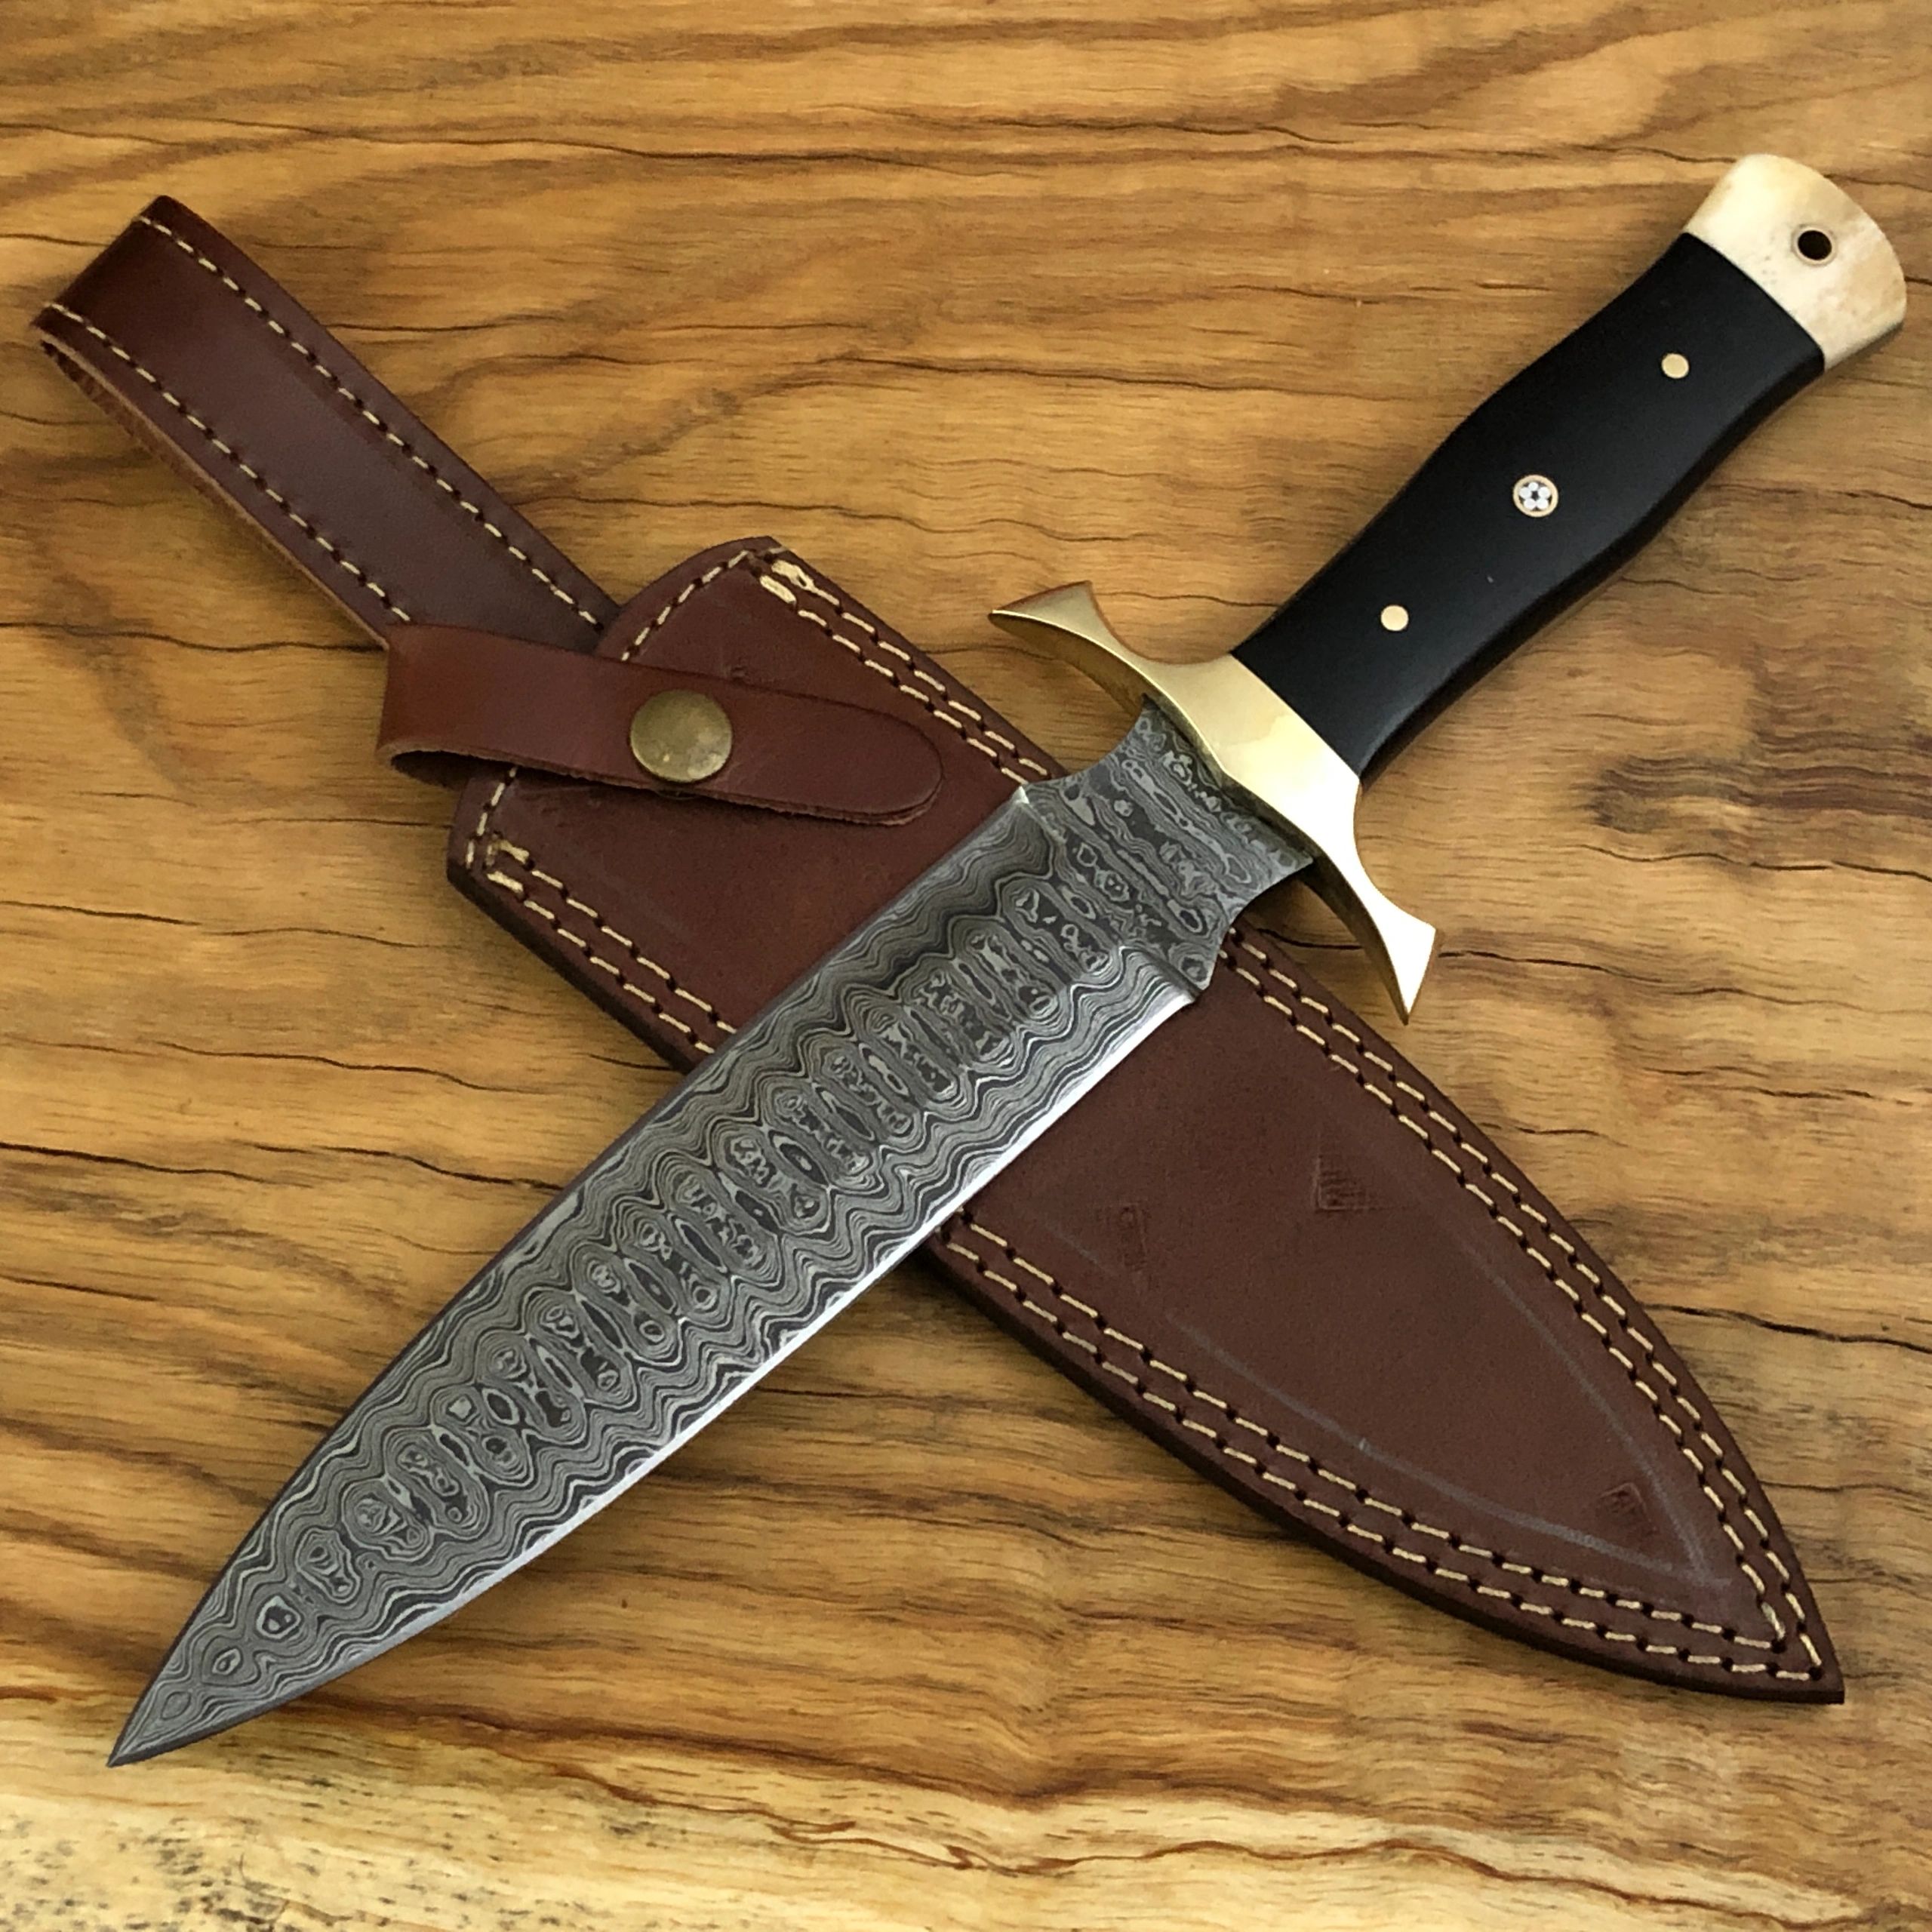 Ash Gears Damascus Knives - The Tanto Knives